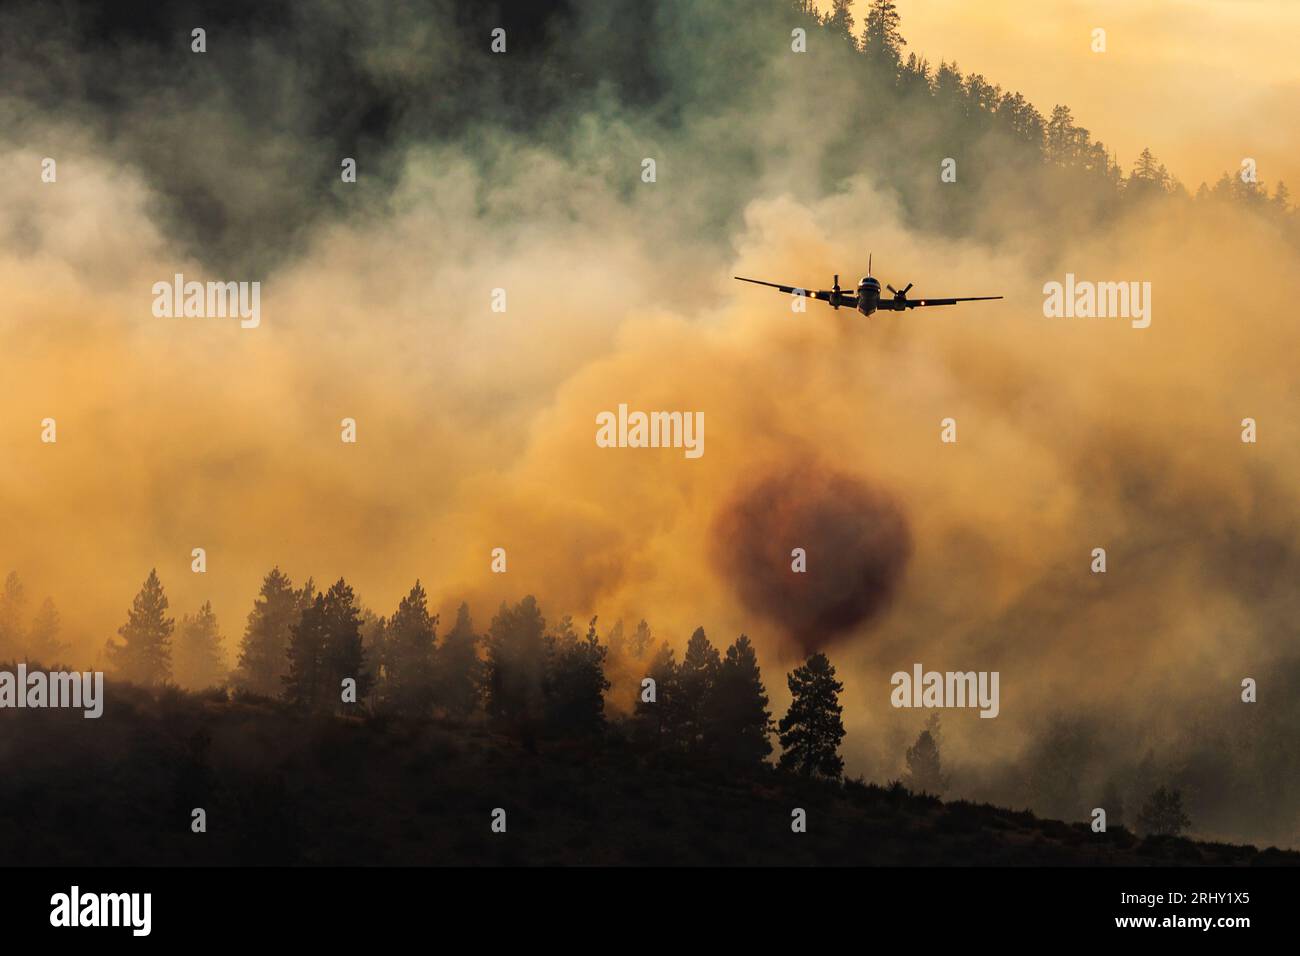 Fire fighting plane dropping retardant on Canadian wildfire. Stock Photo